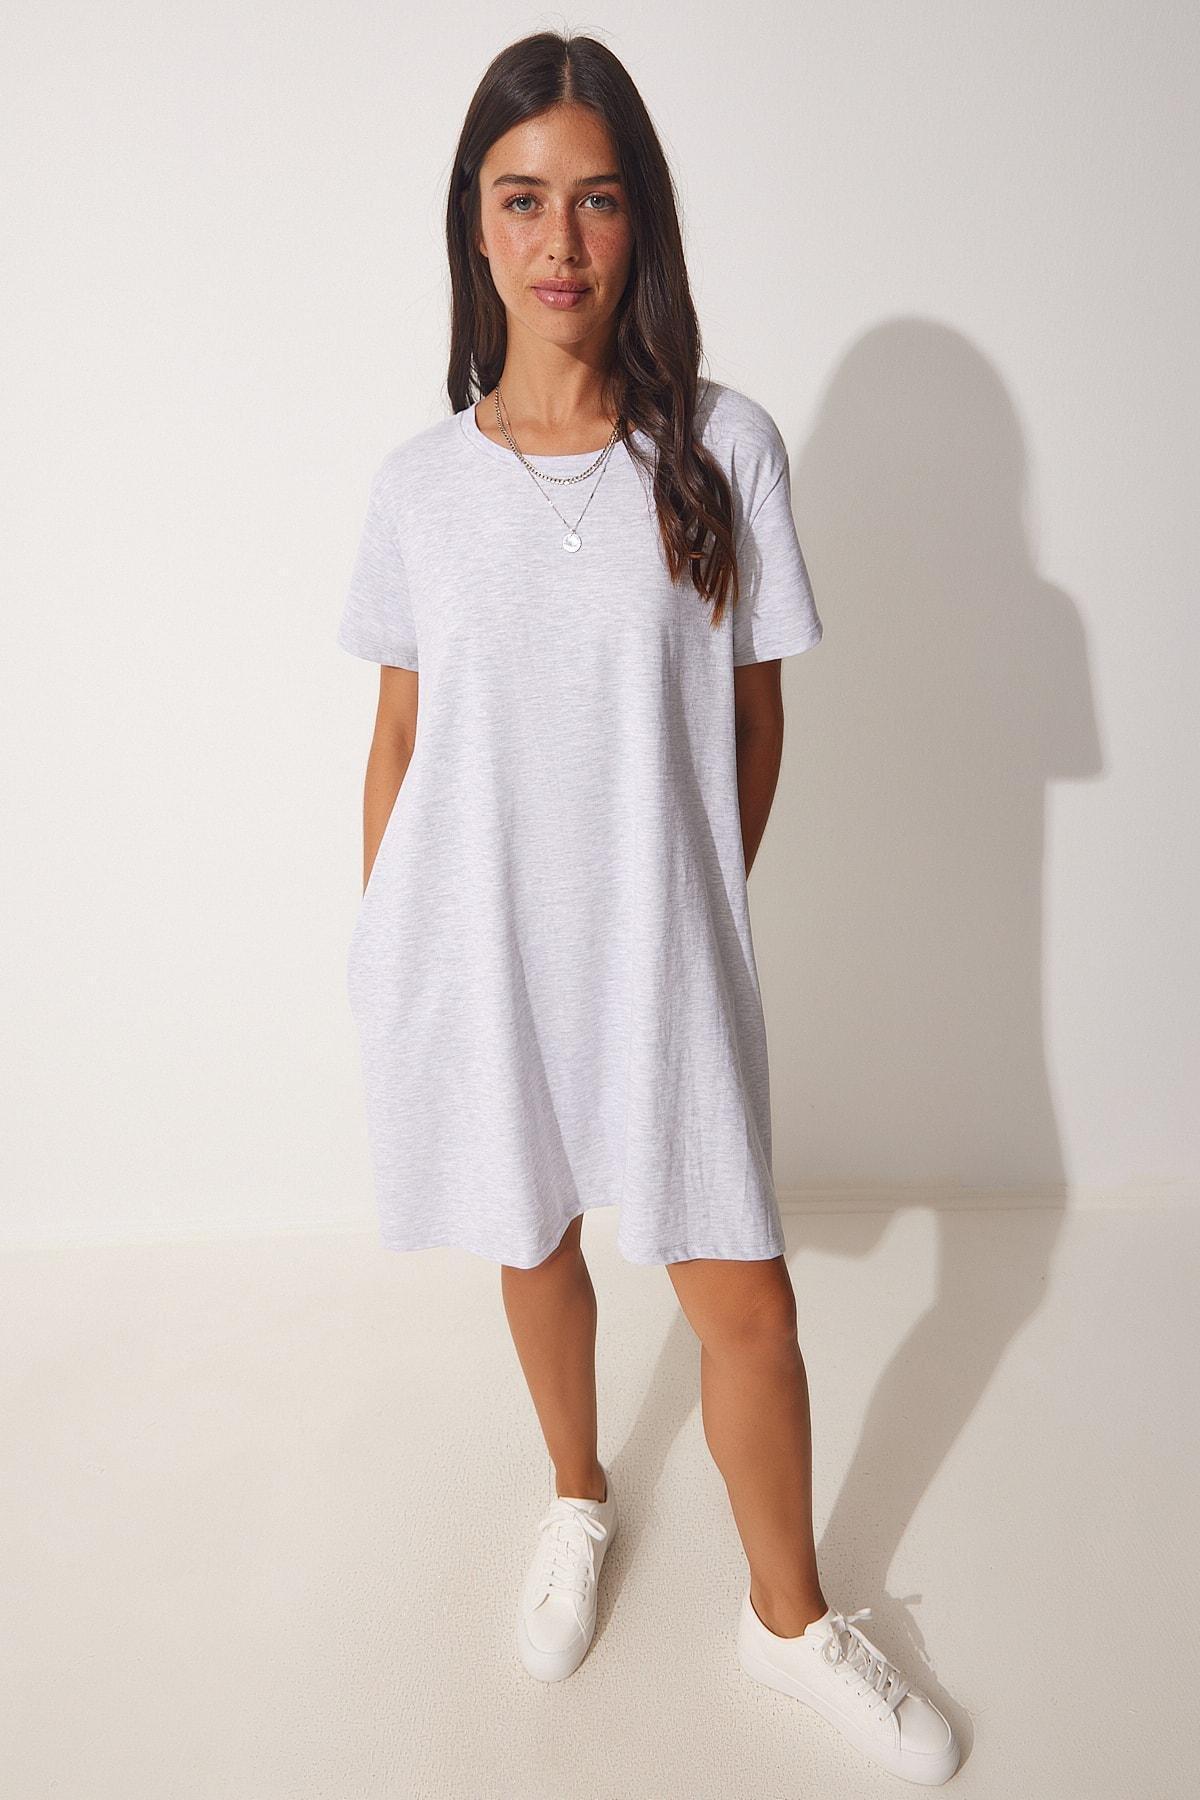 Happiness Istanbul - Grey Cotton Daily Knit Dress